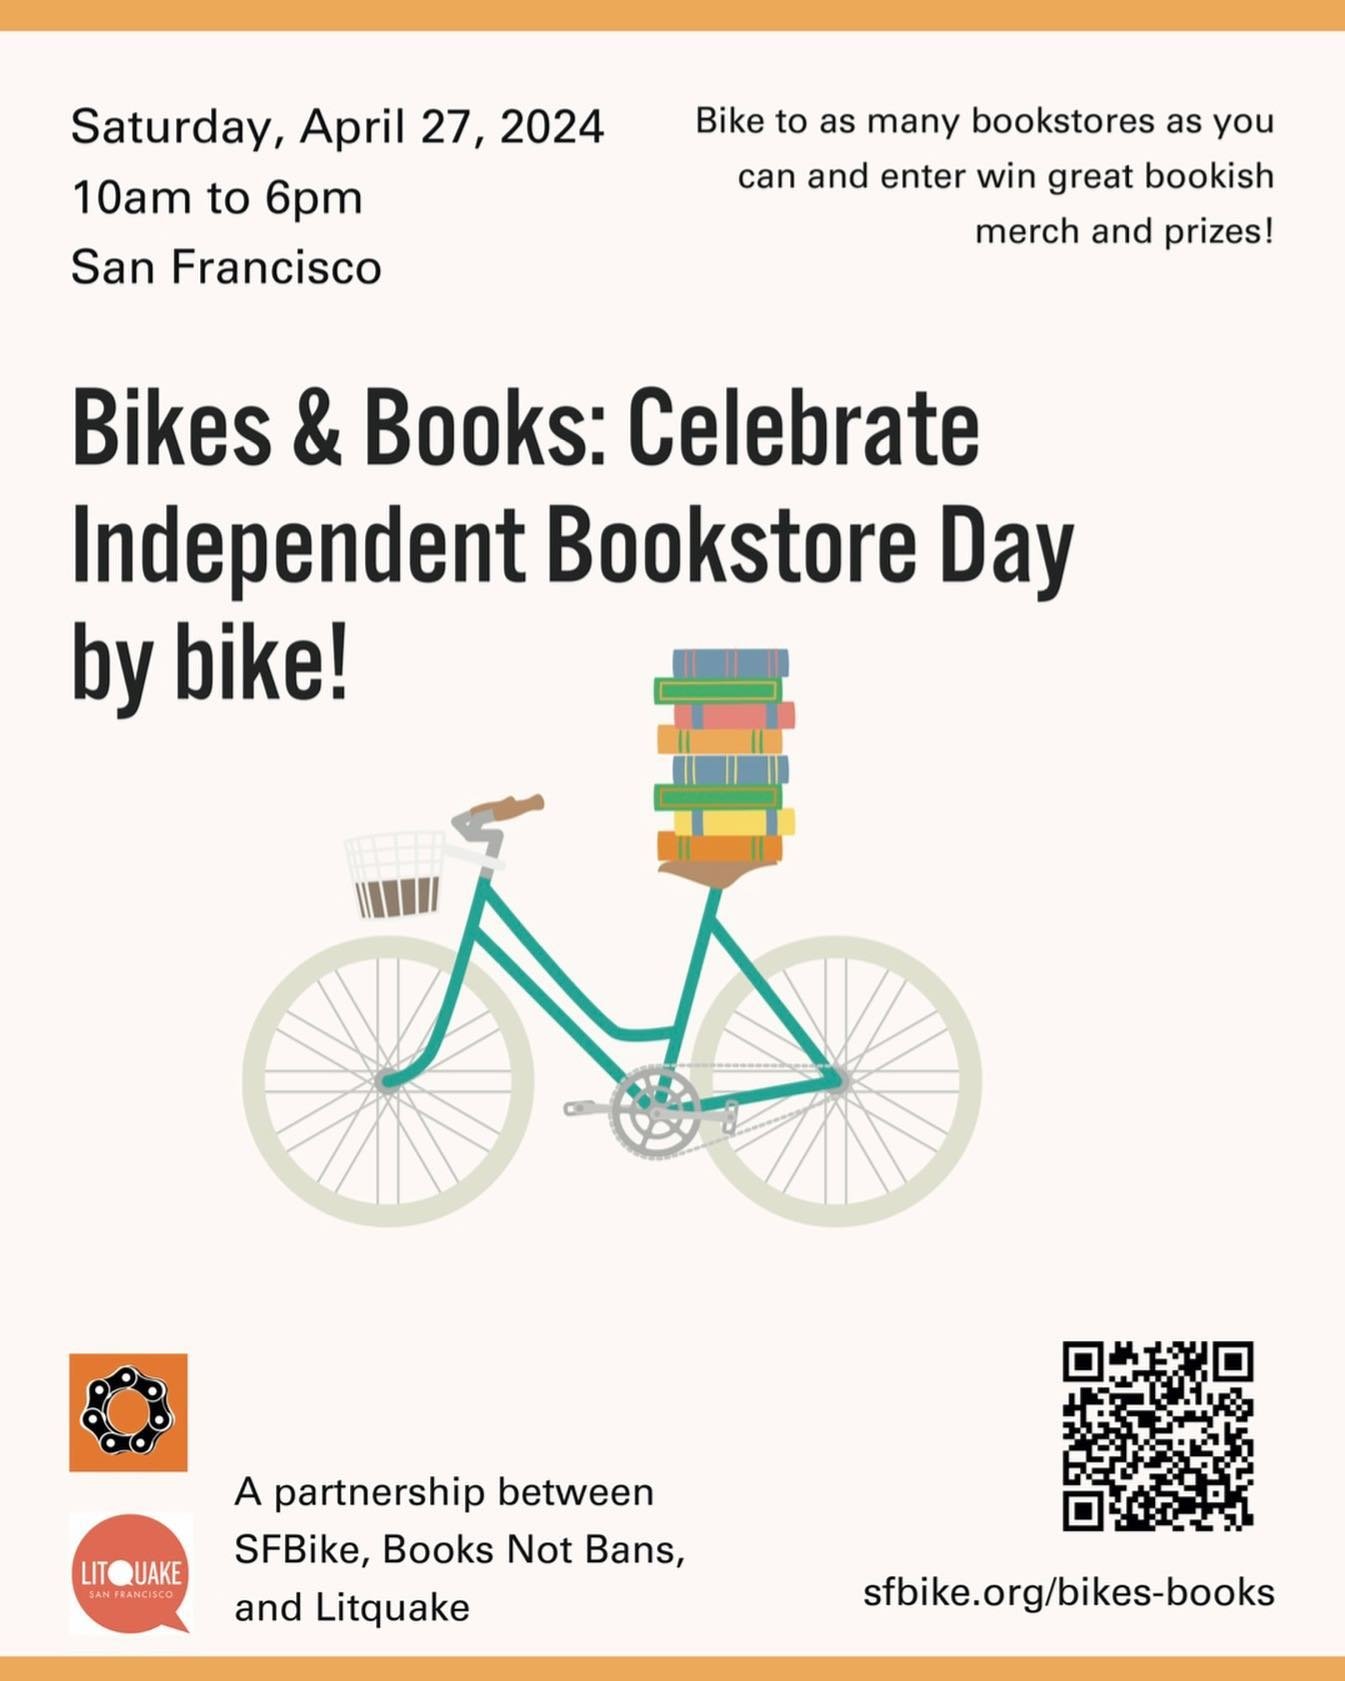 📚This year to celebrate #independentbookstoreday on Saturday, April 27, we&rsquo;re partnering with @sfbike , Books Not Bans and @litquake , and challenging you to visit as many bookstores as you can, by bike! 🚲

🤳Take a selfie and tag #sfbikestob